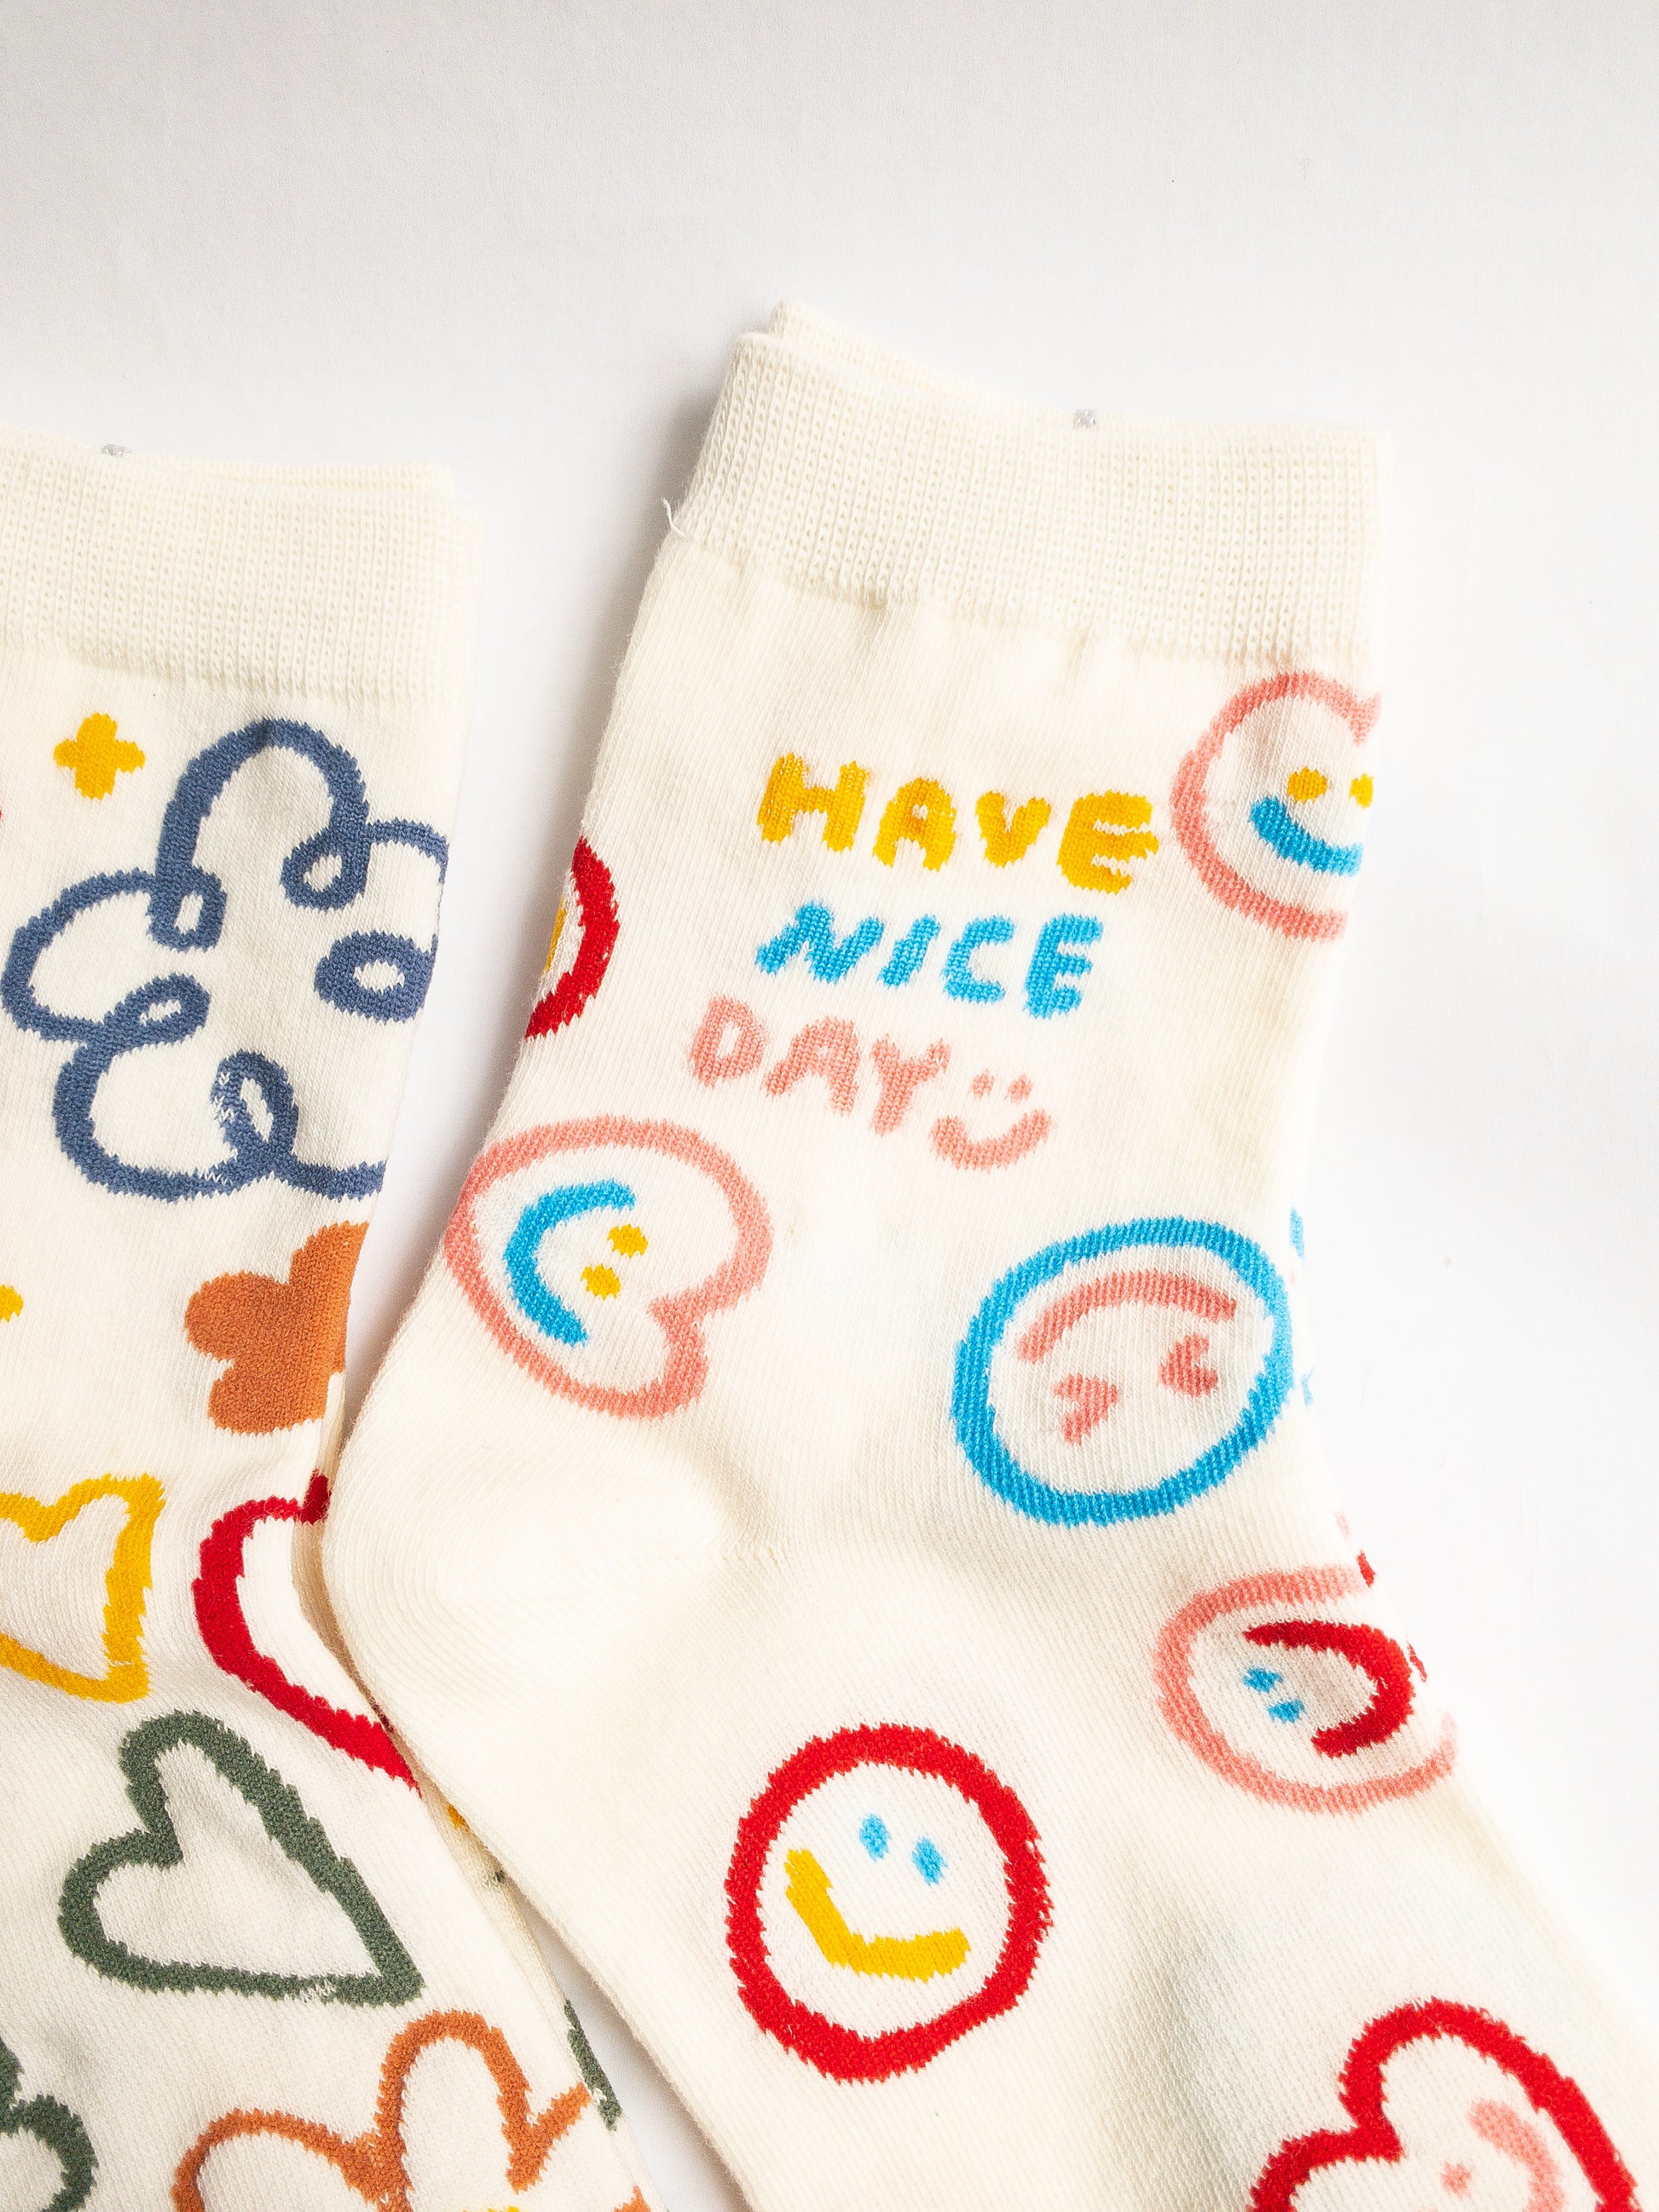 Playful and doodly Have a Nice Day socks! These thick, cozy, and comfortable crew socks feature a cheerful doodle smiley face and flower design, sure to put a smile on your face and a spring in your step every day. 